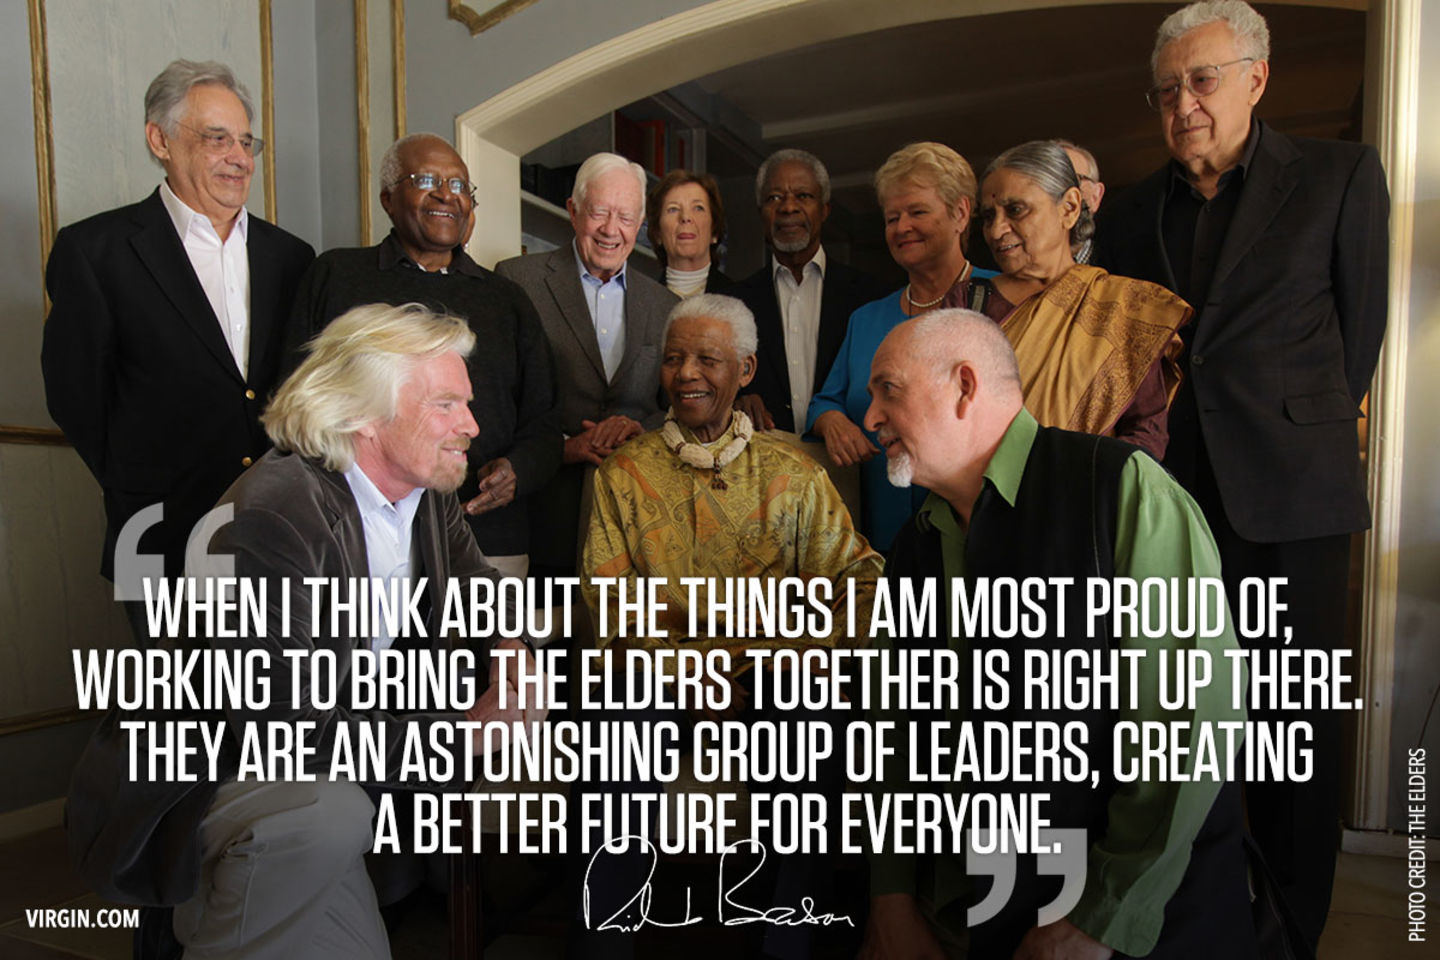 "When i think about things i am most proud of, working to bring the elders together is right up there,. They are an astonishing group of leaders, creating a better future for everyone" quote on the background the elders with Richard Branson